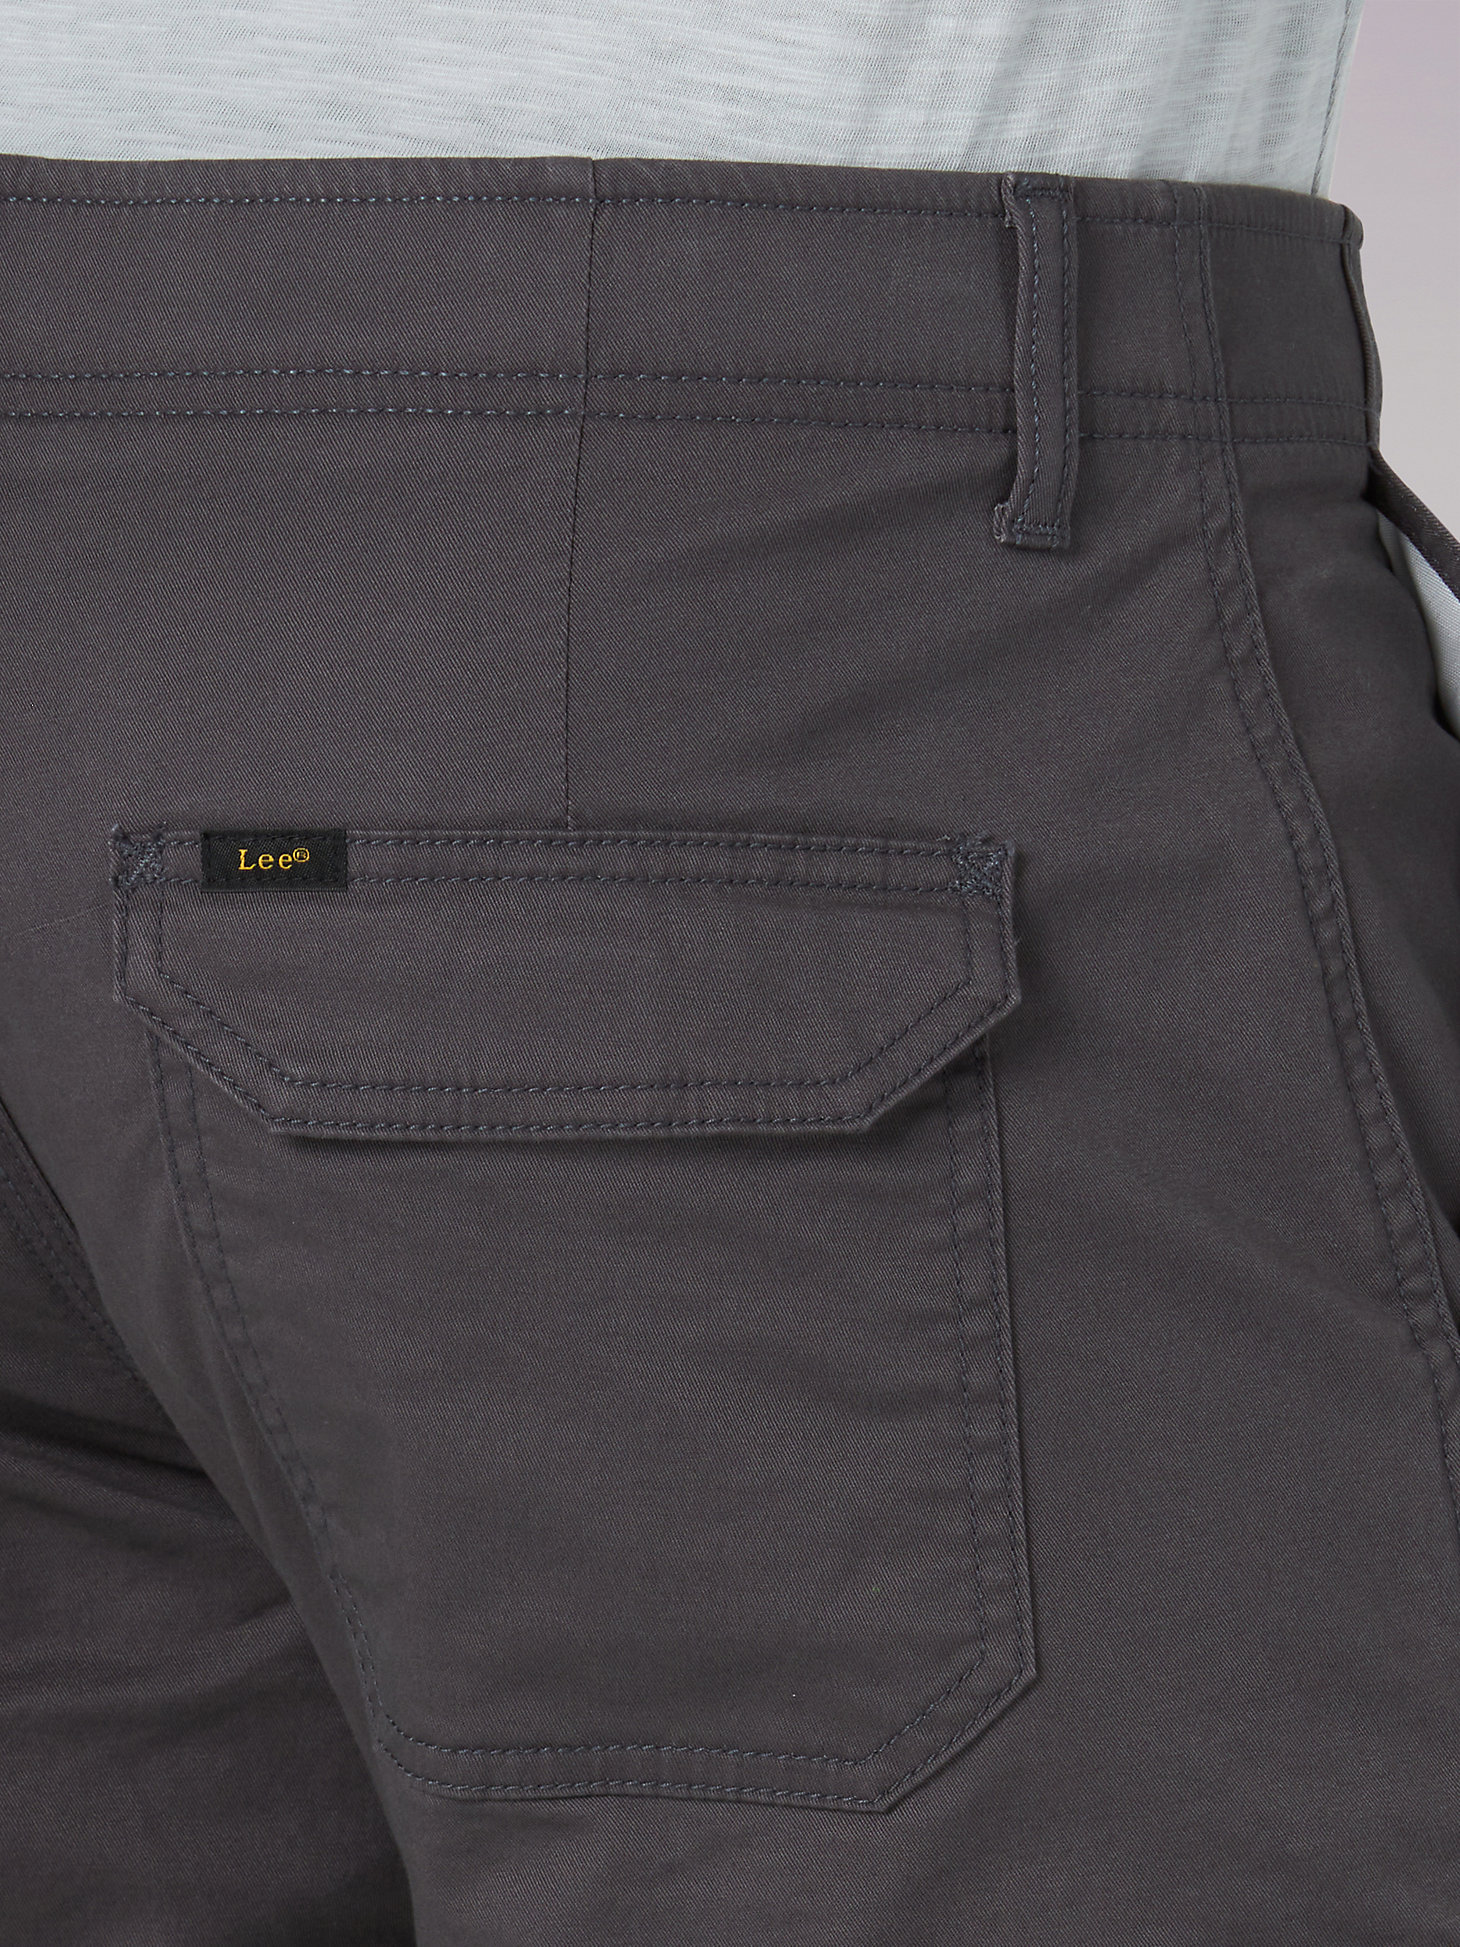 Men's Extreme Comfort Cargo Twill Pant in Charcoal alternative view 3